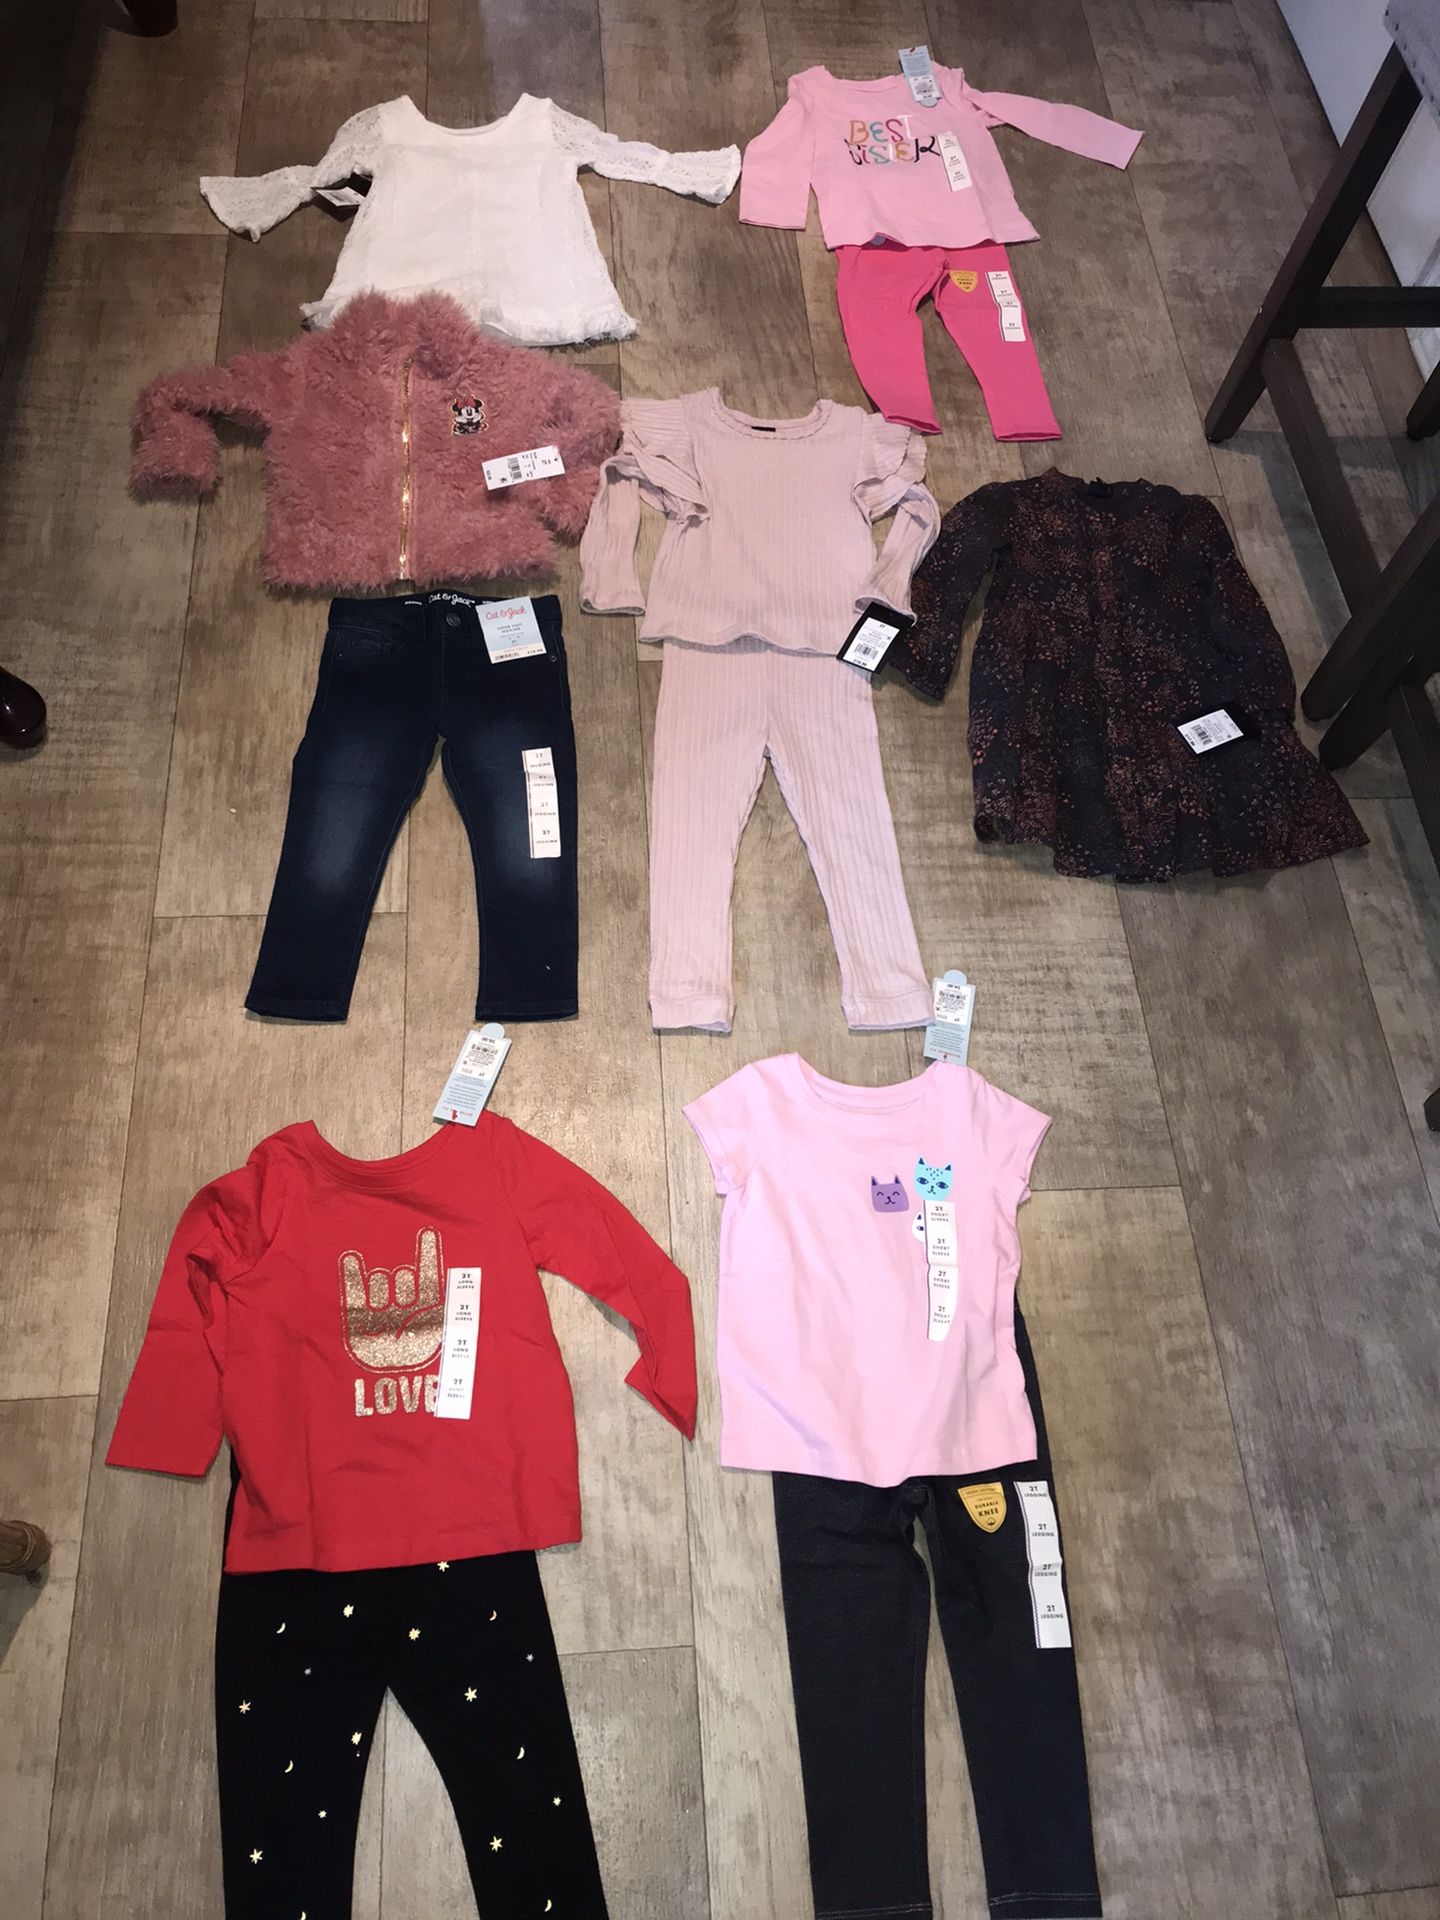 New girl size 2T clothes target brand